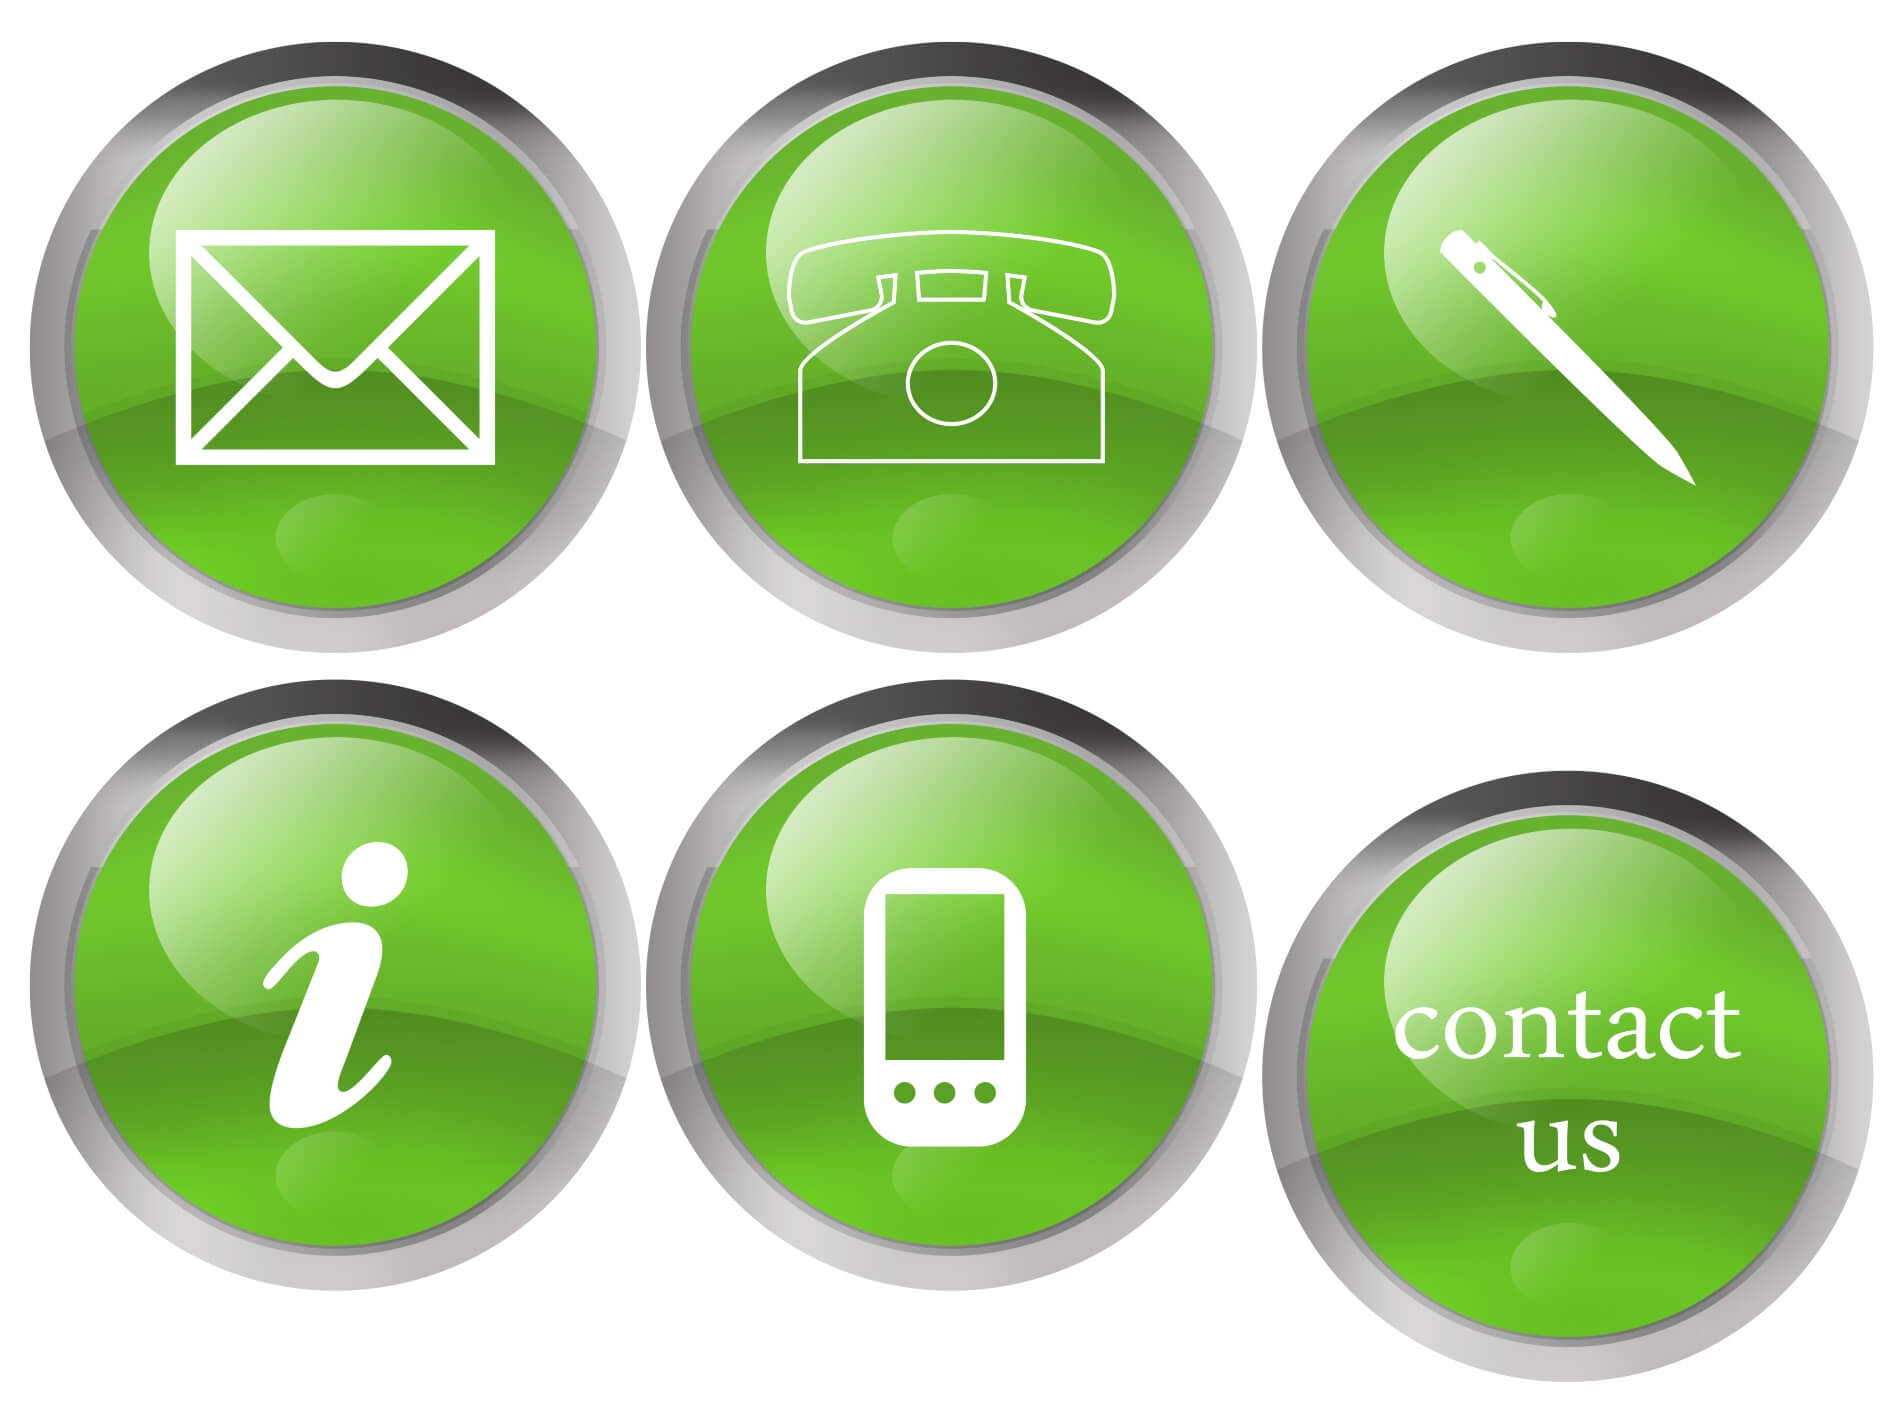 Contact us icons - rectangle layout